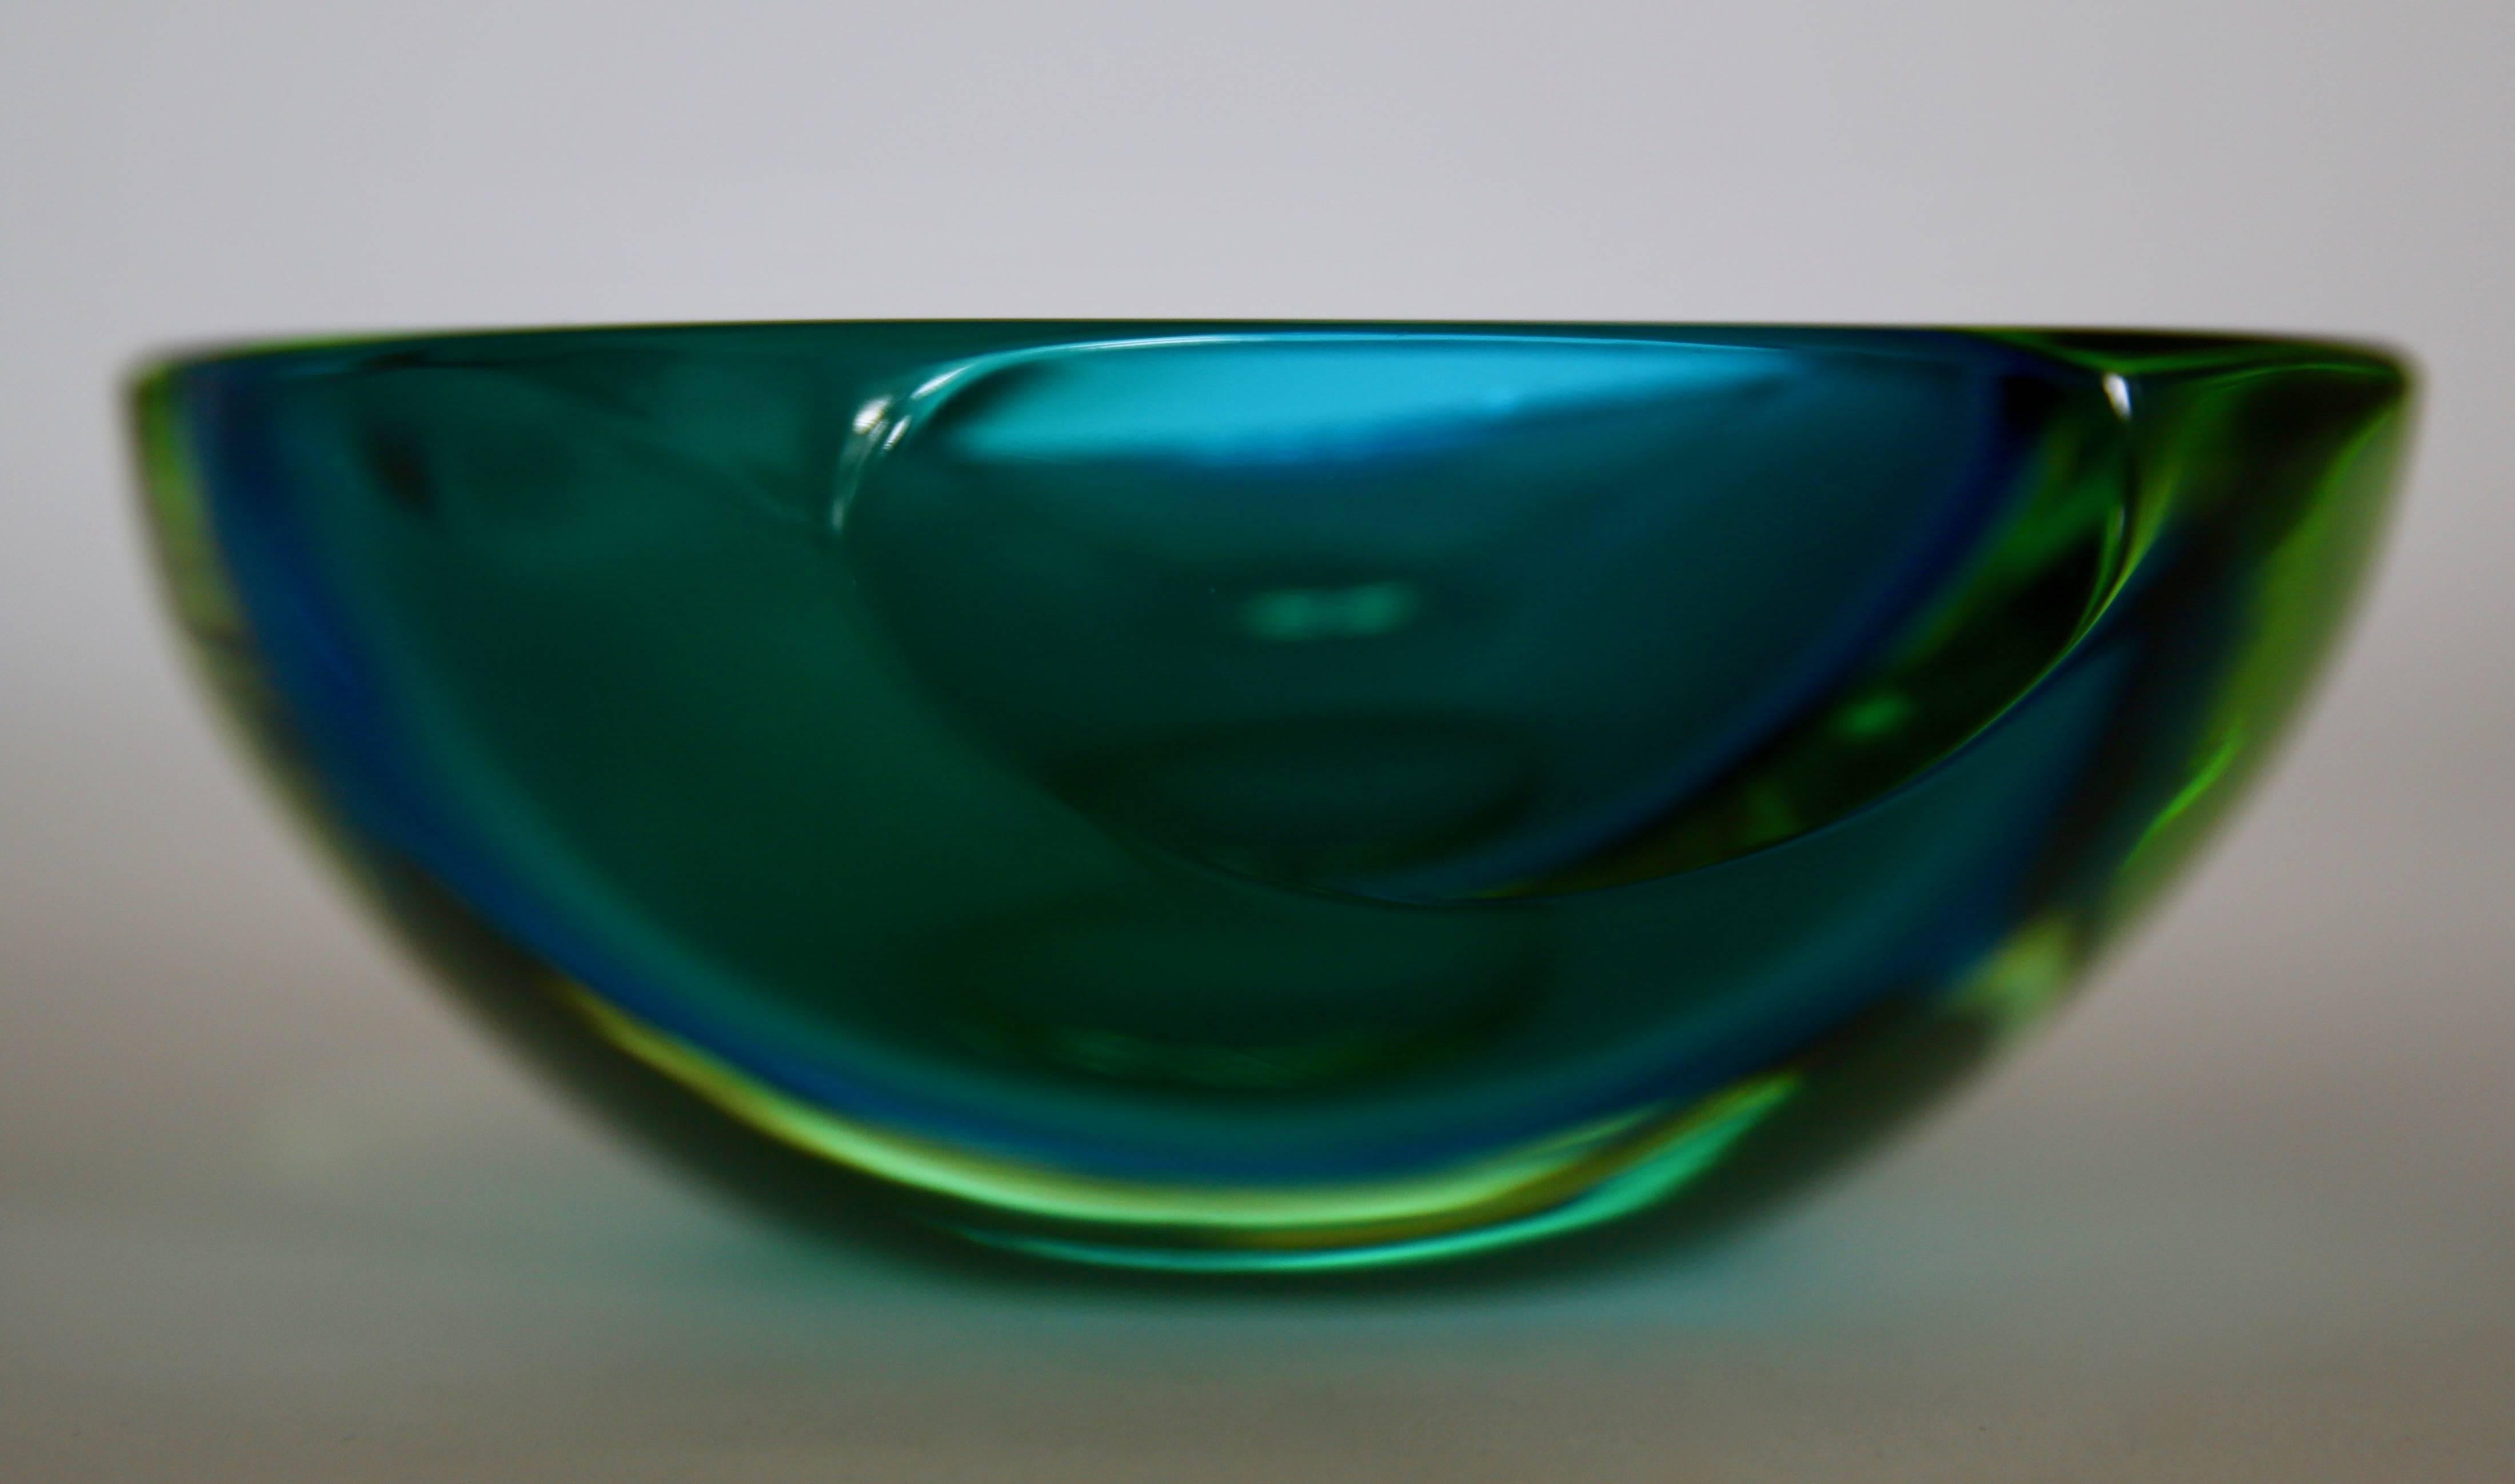 Murano Sommerso green and blue glass bowl, in absolutely excellent condition: no scratch, no loss: impeccable.
The brilliant colors of green and blue of this faceted flat cut polished glass Murano geode bowl is exquisite.
When light hits the bowl,